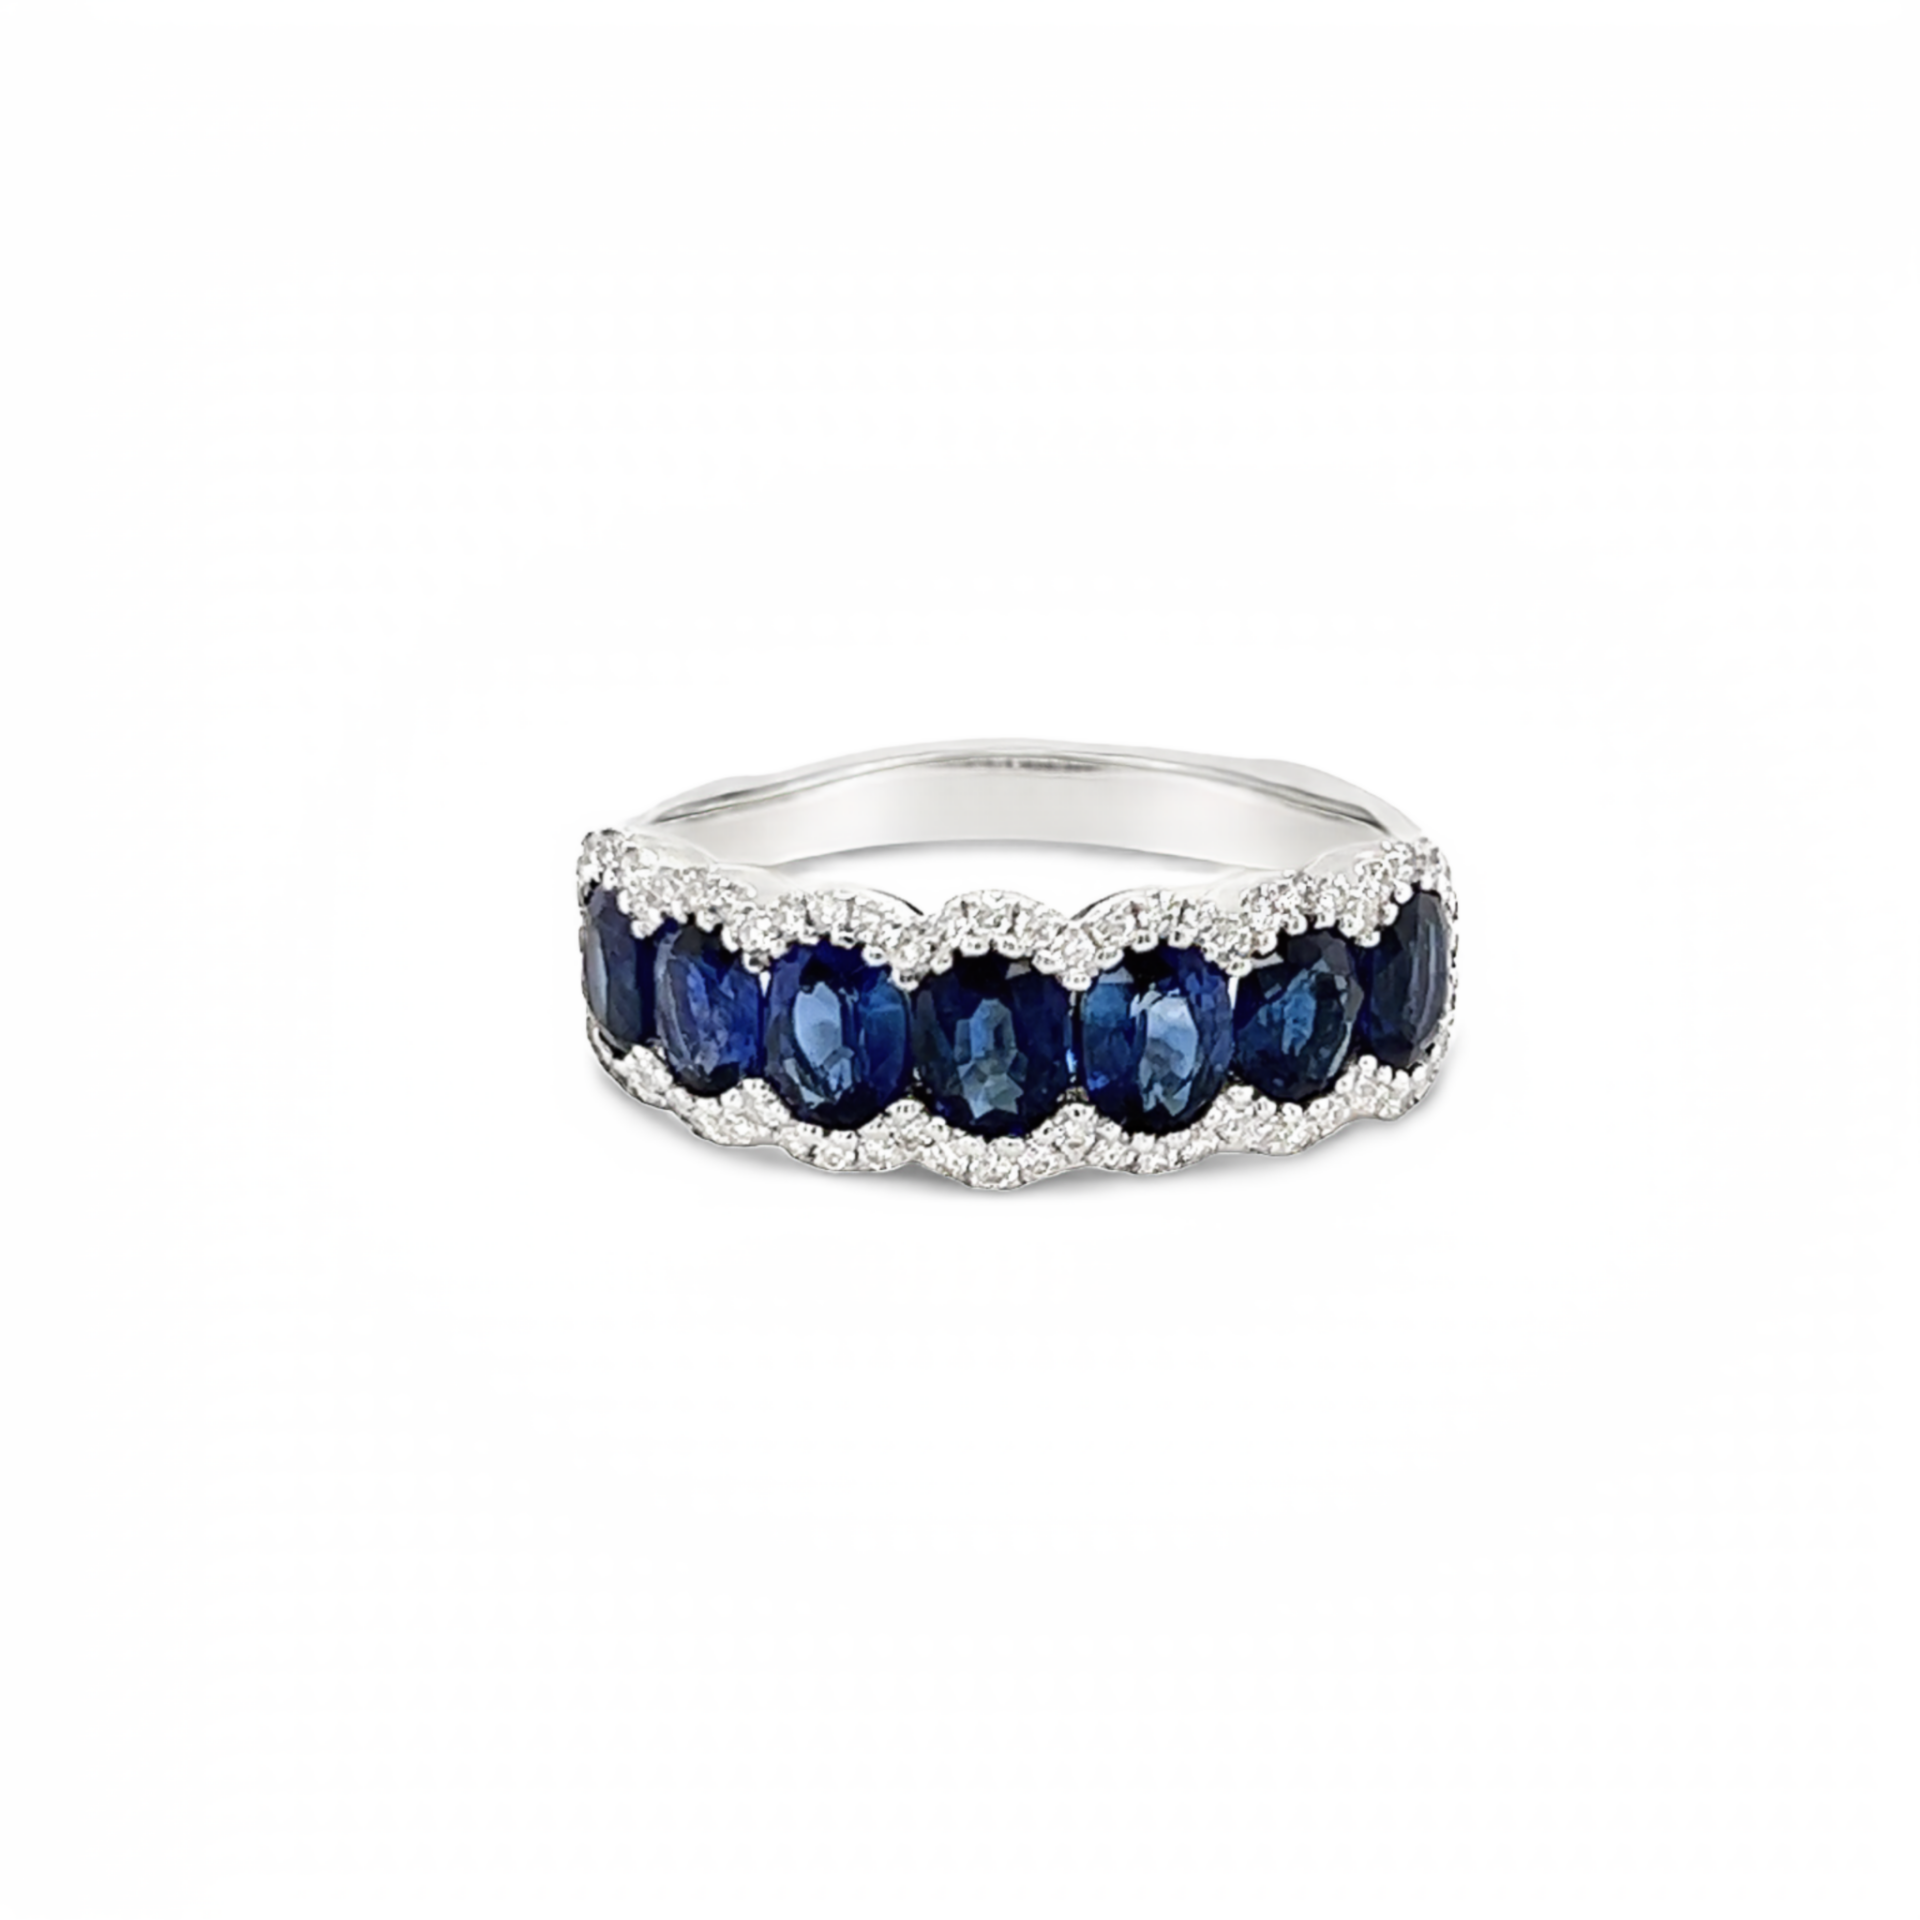 White Oval Sapphires Ring